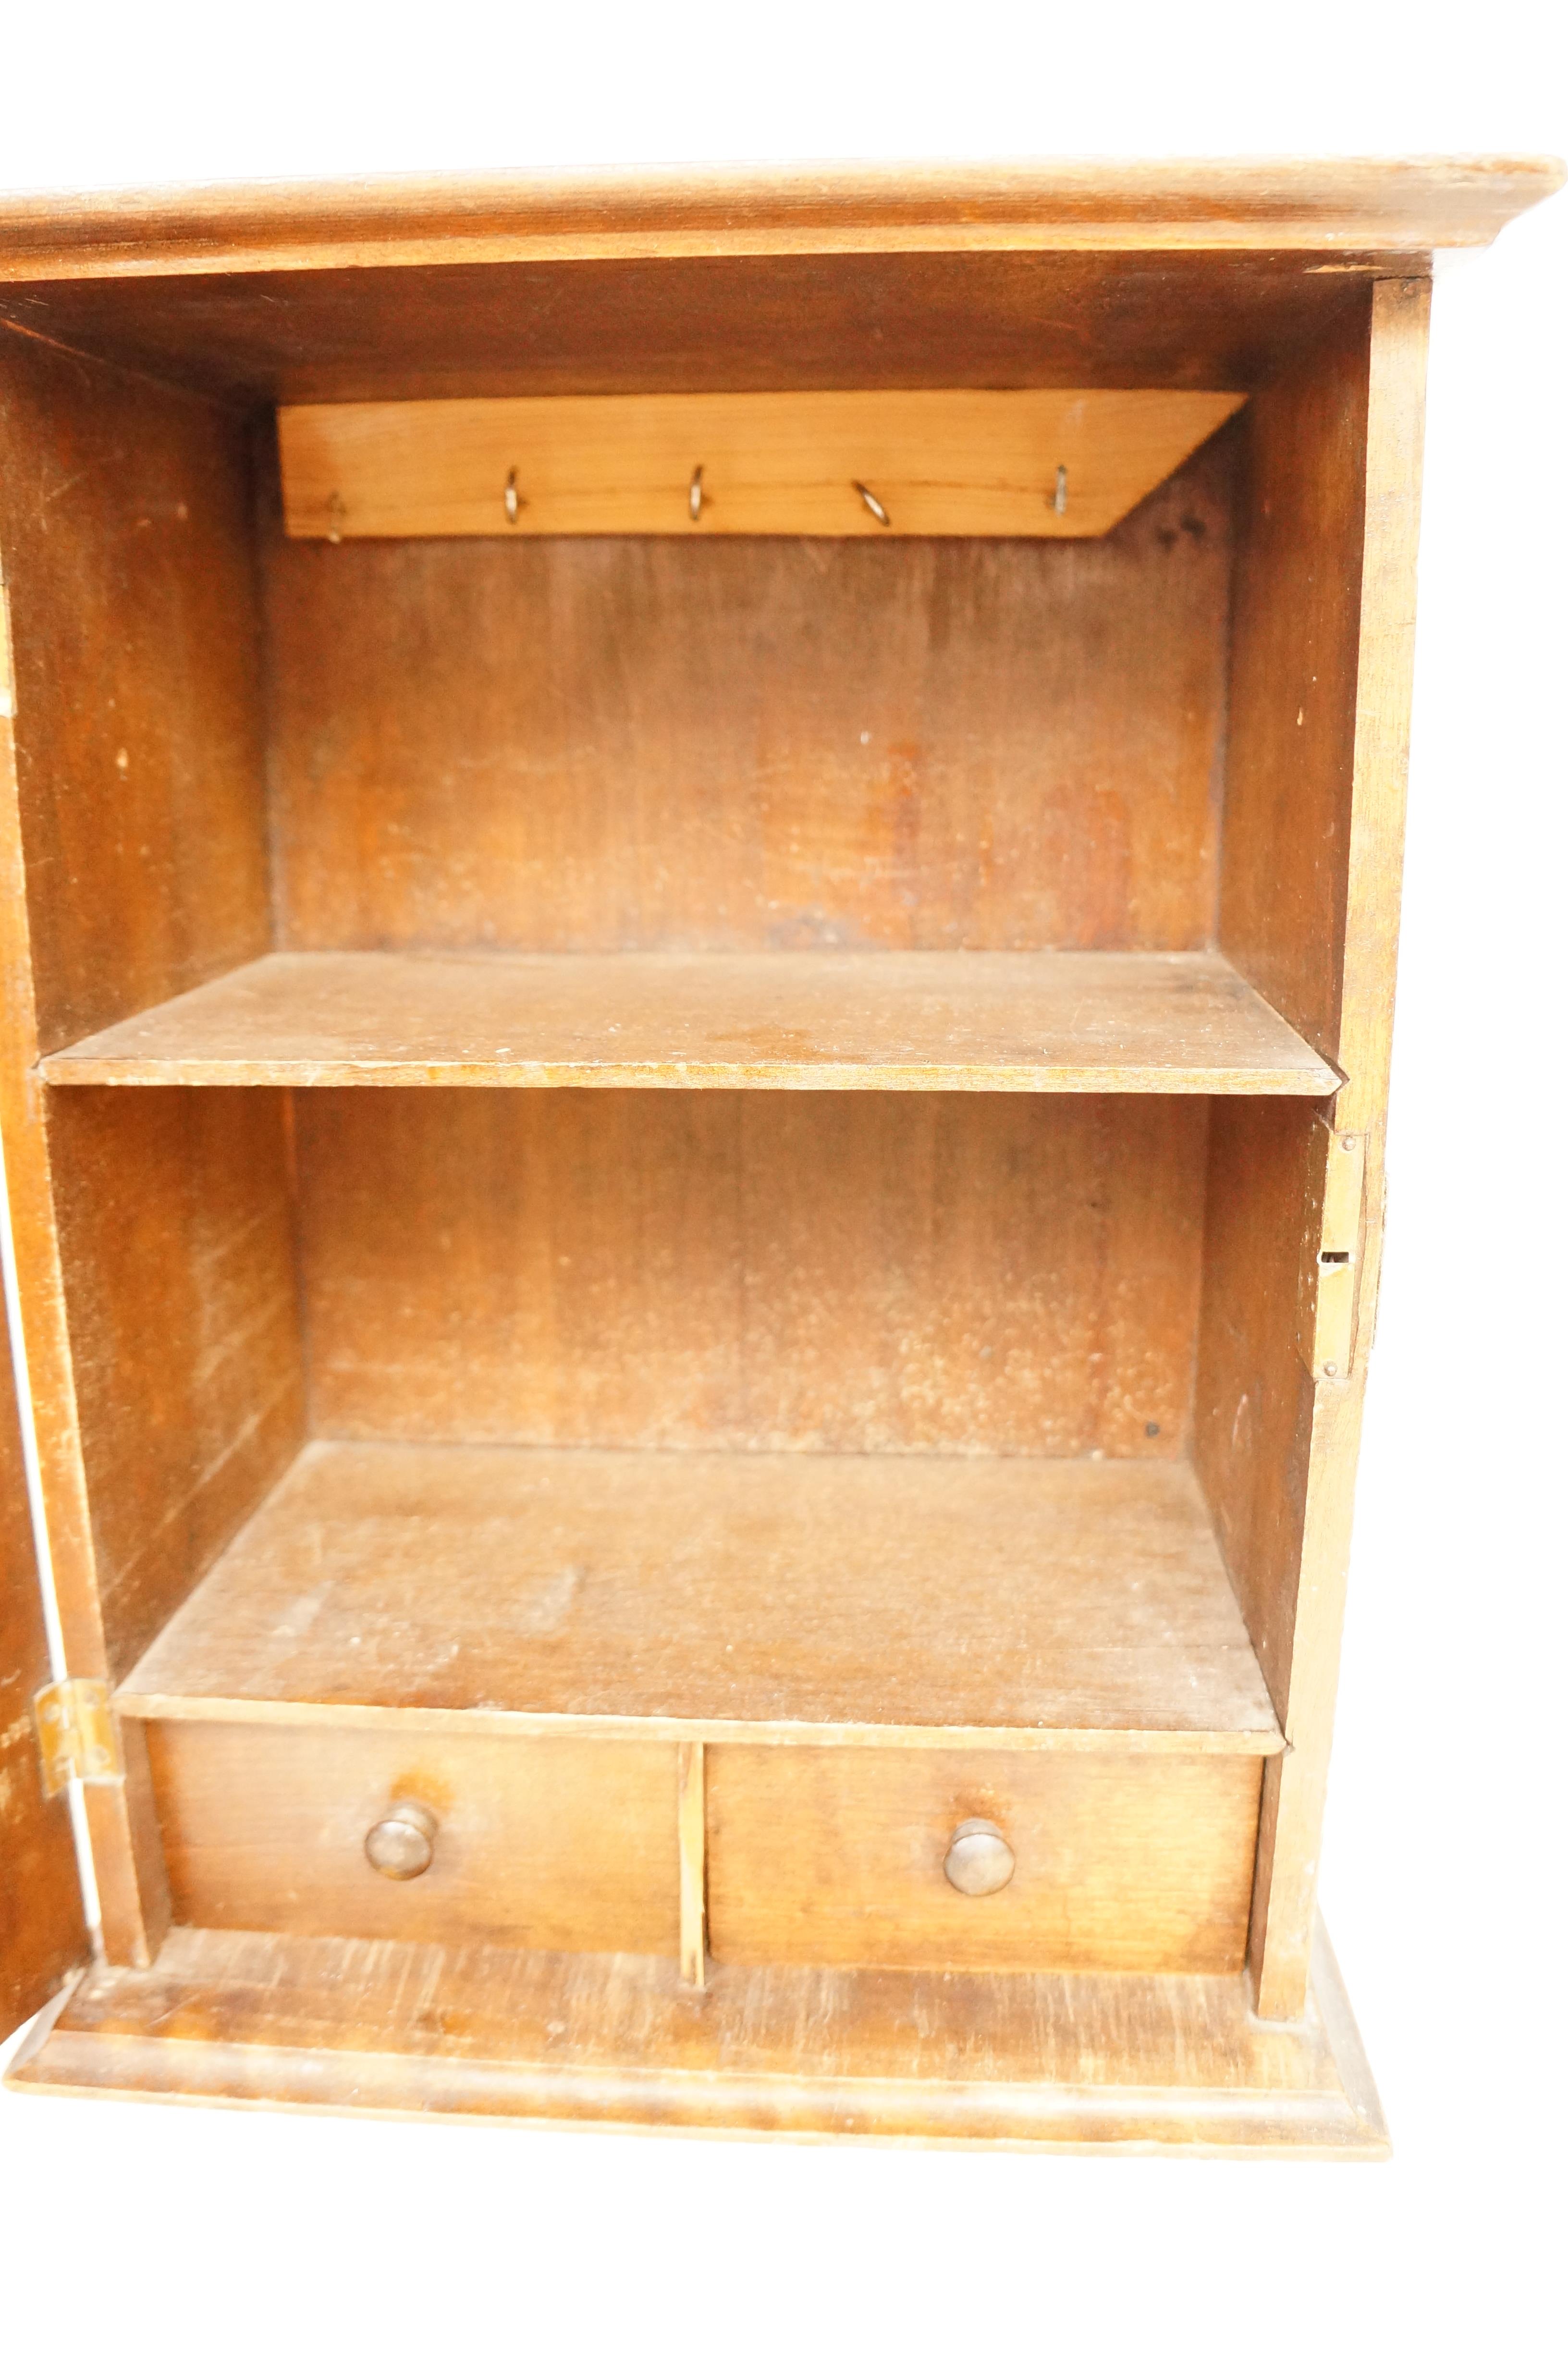 Small Wall Hanging Spice Cupboard - Image 2 of 2